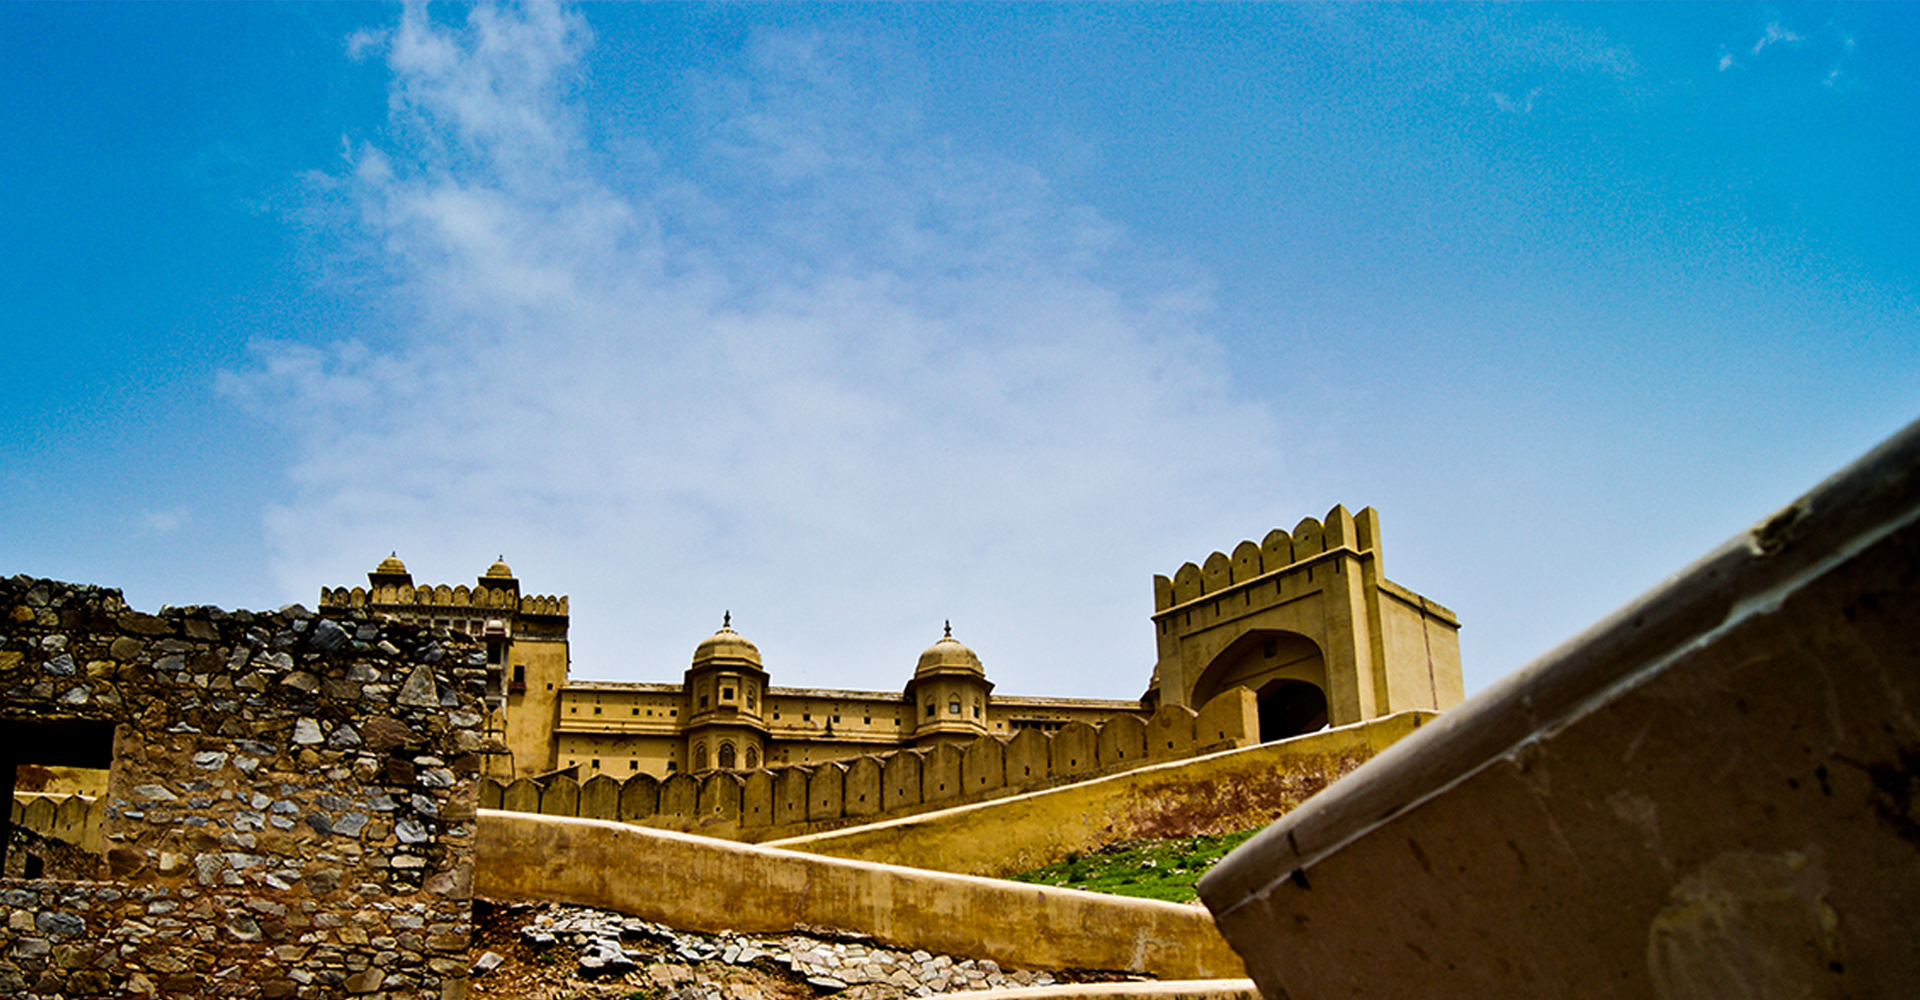 Rajasthan_fort, backpacking in india, backpacking around india, india travel, budget trael